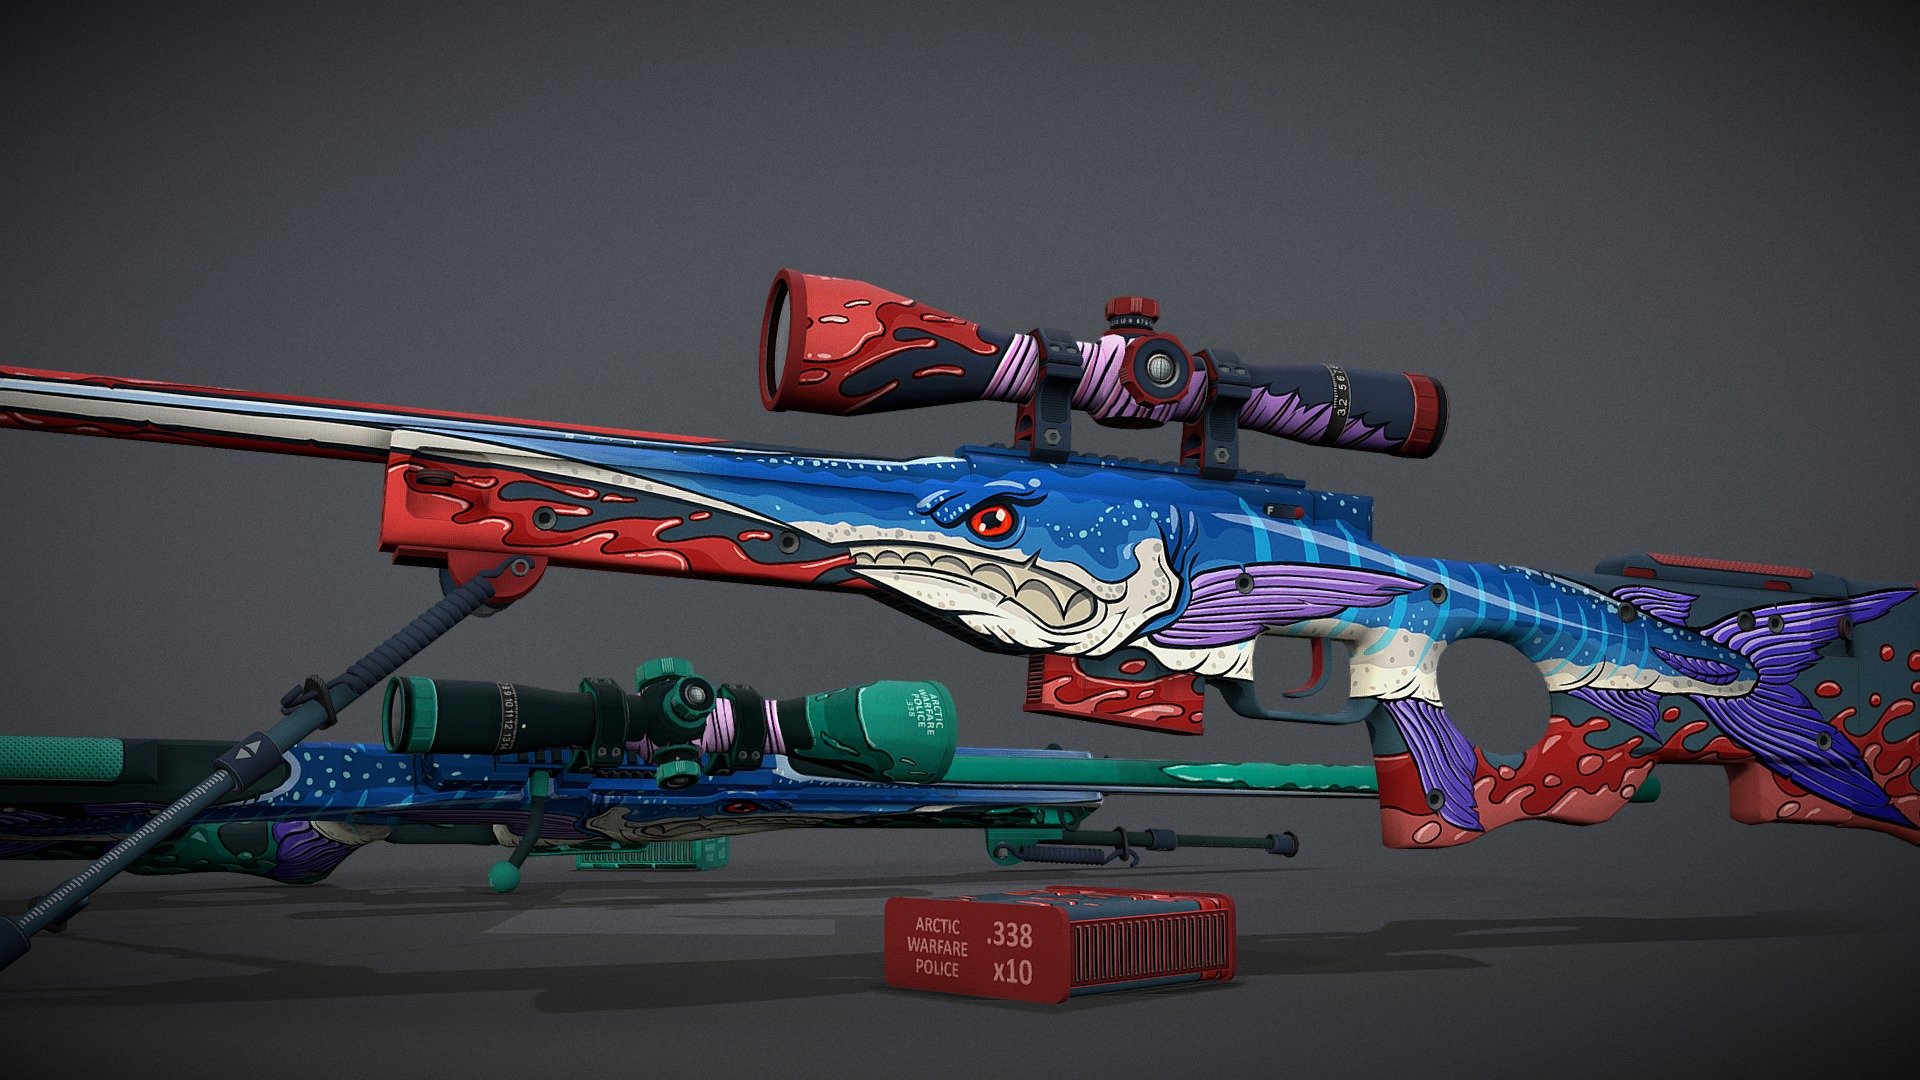 Texturing : models from Counter-Strike: Global Offensive.

Here is The Seas Impaler AWP skin for CS:GO featuring the swordfish.

The swordfish is a very dangerous predator.
Excellent swimmer.
Superior Vision.
He impales its prey in a single and fatal blow.
Do not expose yourself in front of the Seas Impaler.

Artwork made in Adobe Illustrator. Projection made in 3D-Coat. Details and finishing touches in Adobe Photoshop.

The skin on Steam Workshop : http://steamcommunity.com/sharedfiles/filedetails/?id=1142712281

The alternative Perfect World skin on Steam Workshop : http://steamcommunity.com/sharedfiles/filedetails/?id=1150651380

More pictures on Imgur (screenshots, process) : https://imgur.com/a/AOYO0

Thank you for watching and your feedbacks.

MG - AWP | SEAS IMPALER - 3D model by MGBazz 3d model